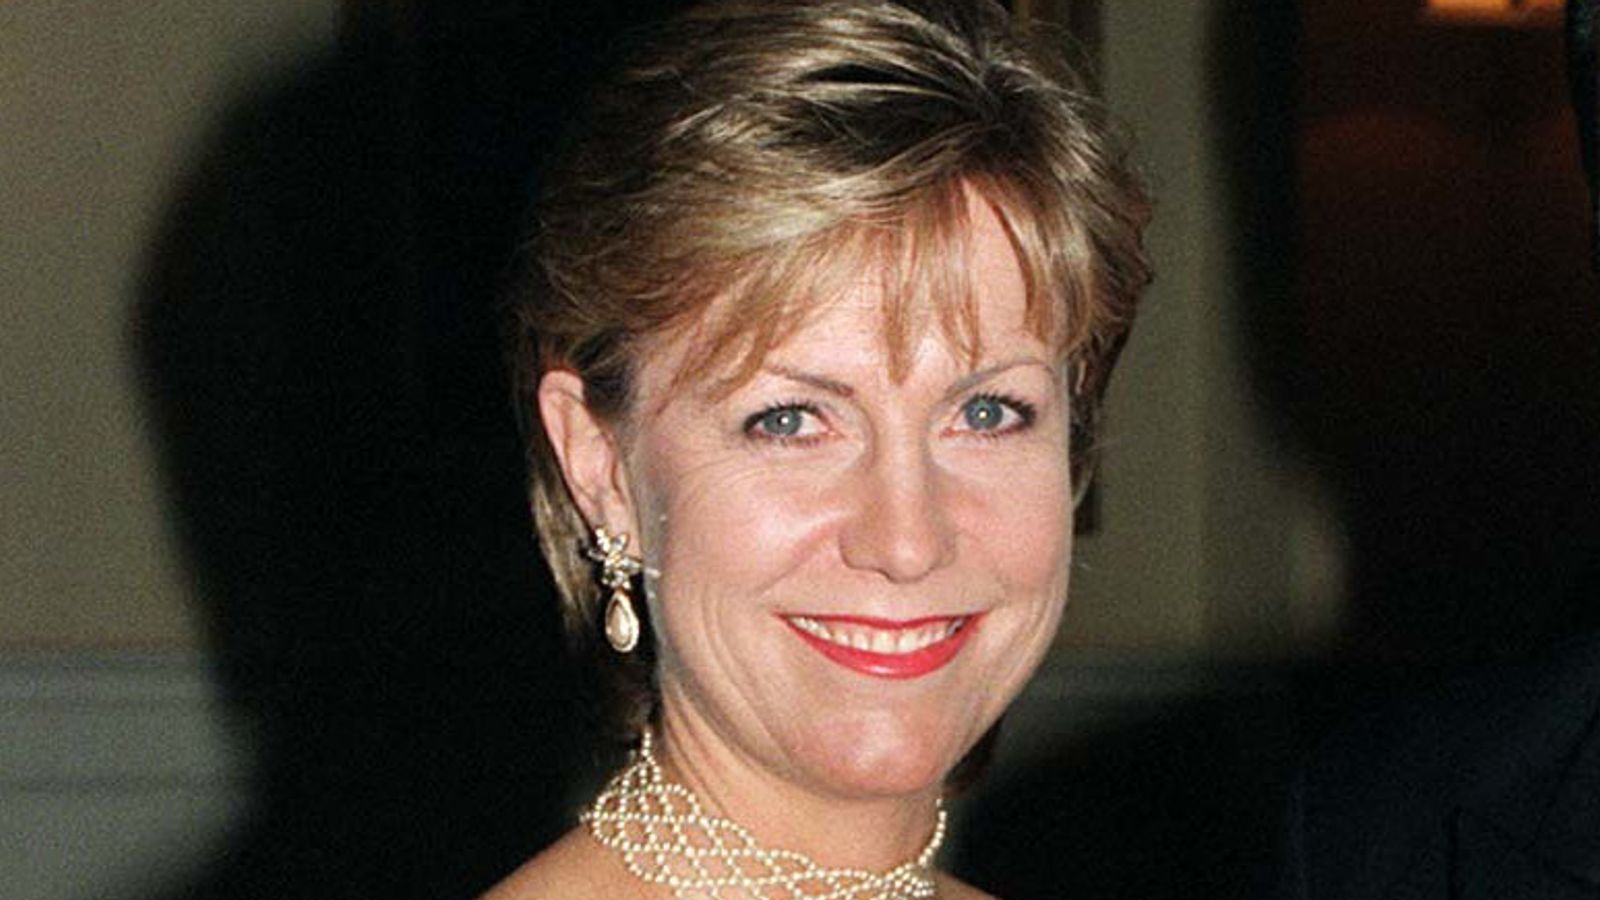 Jill Dando: TV presenter's brother Nigel Dando gives his theory on star's unsolved murder 24 years on